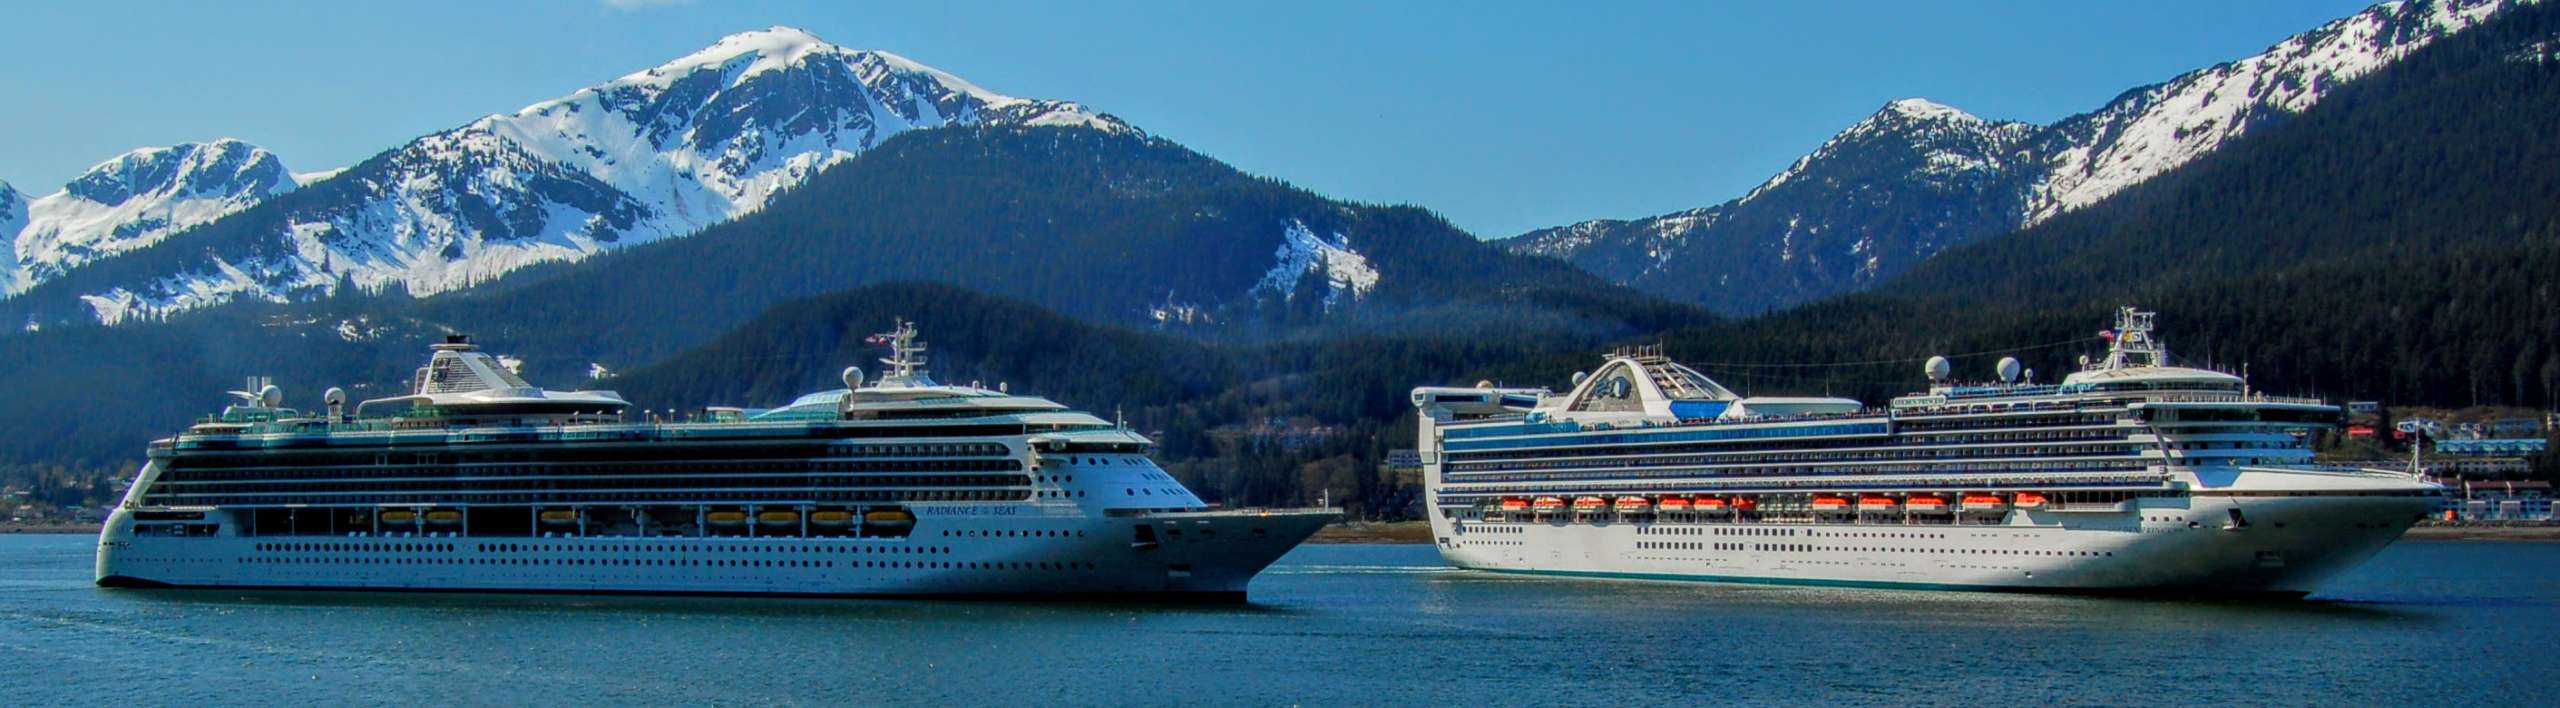 Two cruise ships in Gastineau Channel